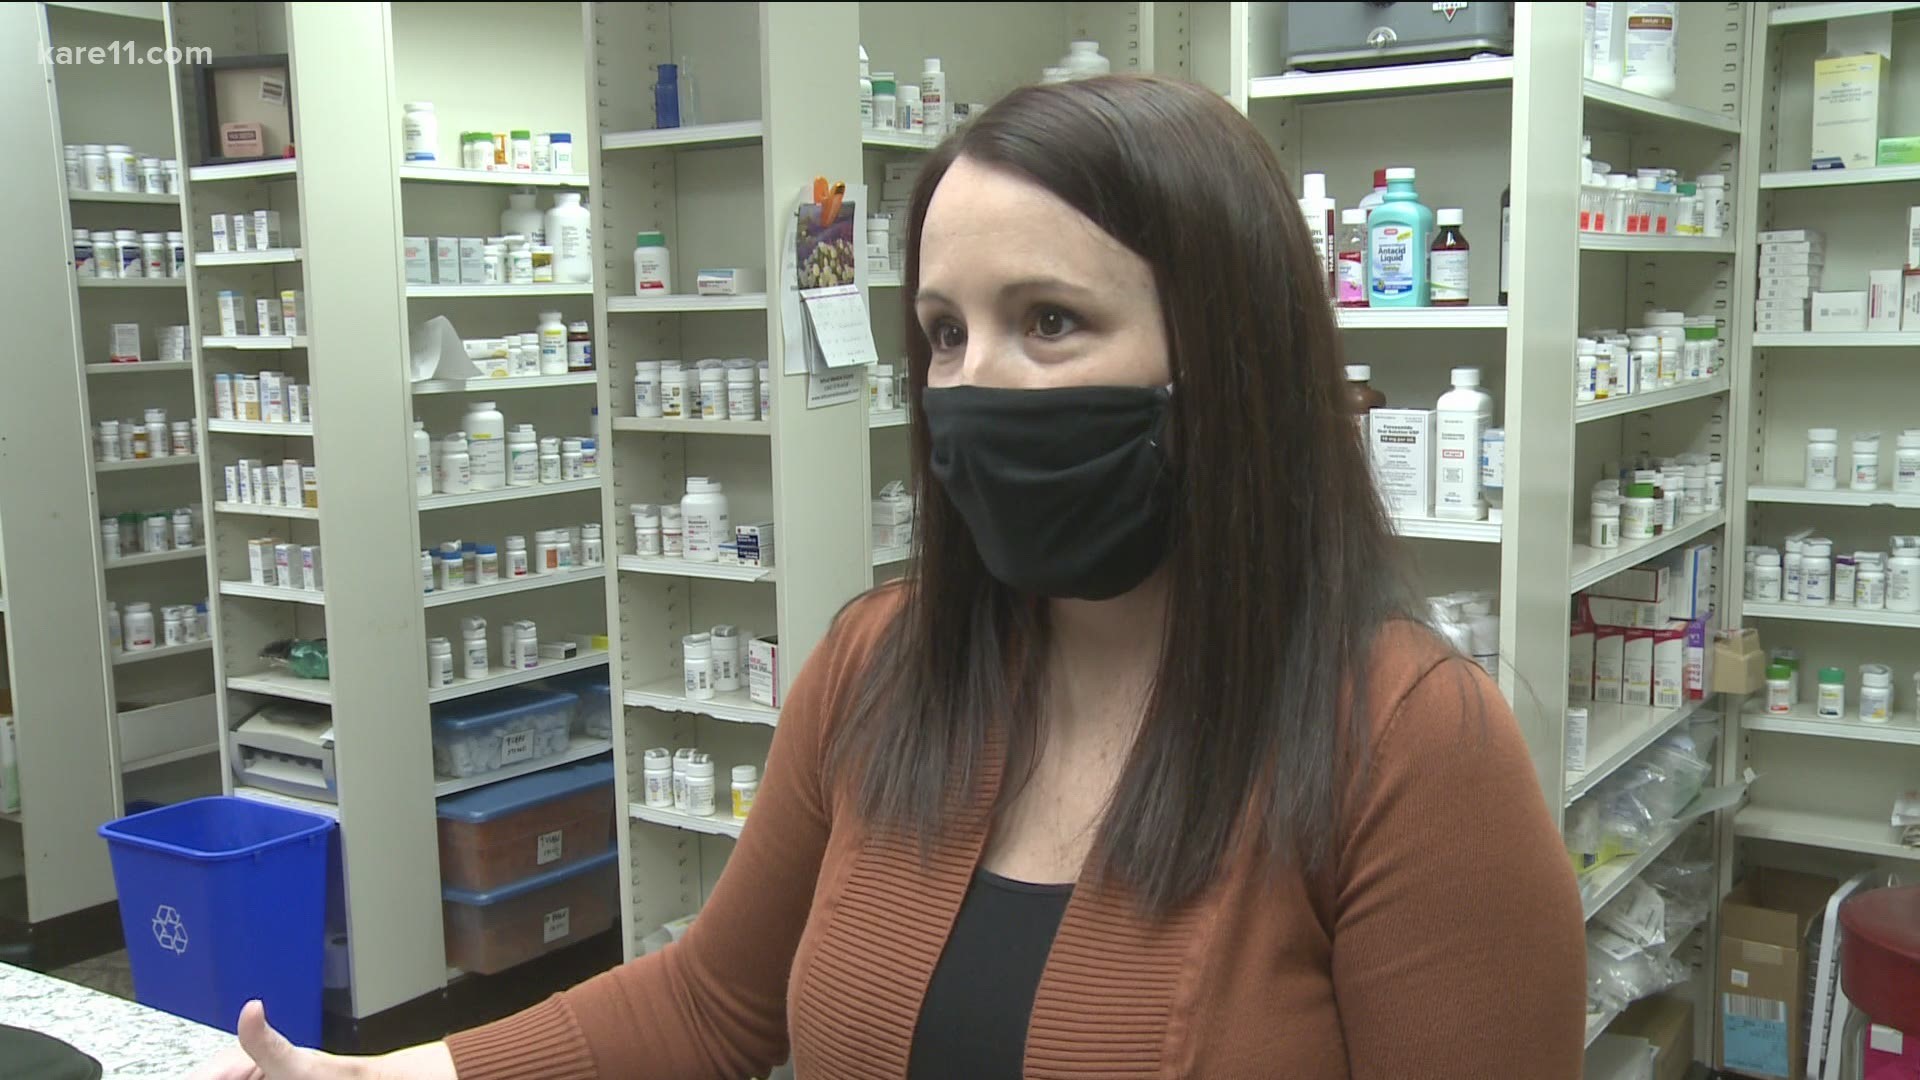 An Elk River pharmacist proposes changing how doses are manufactured. "I think we’re past the point of mass vaccination clinics."